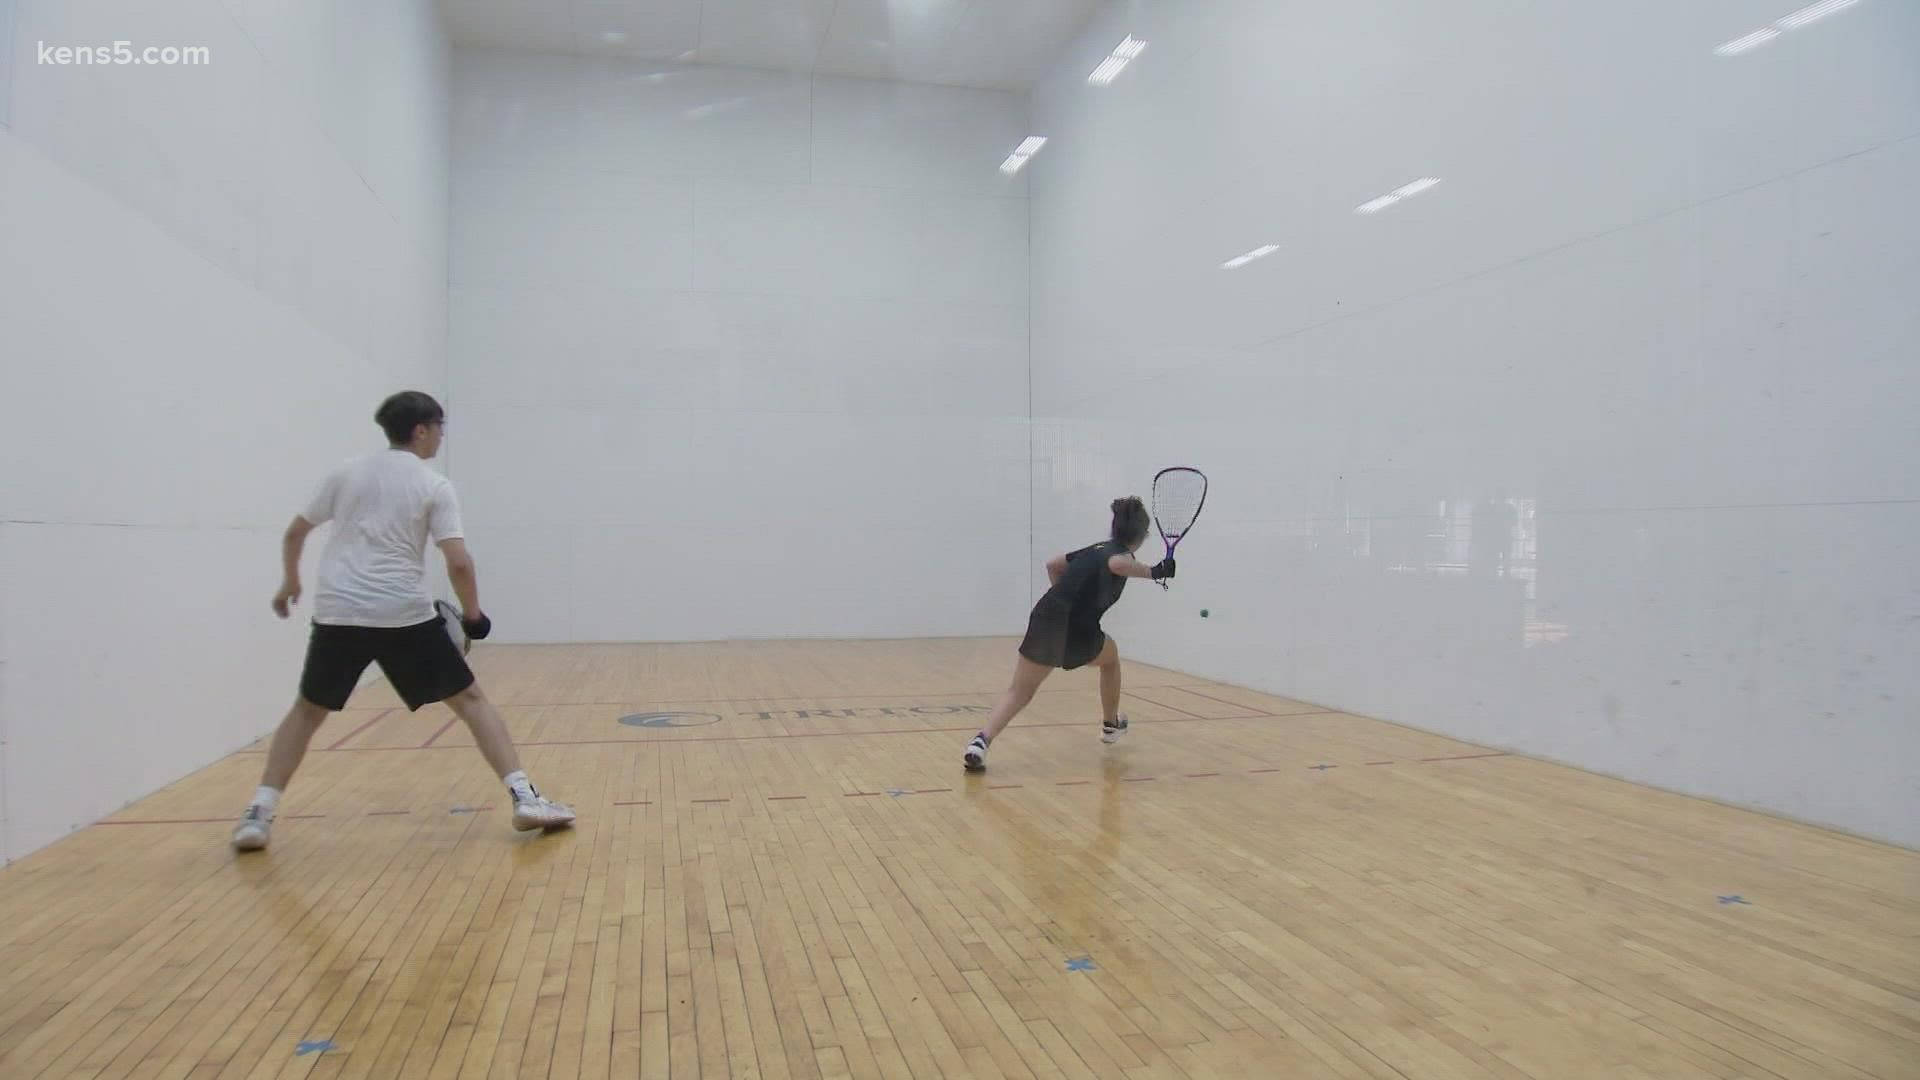 Exciting Moment of Powerful Return in a 1v1 Racquetball Match. Wallpaper